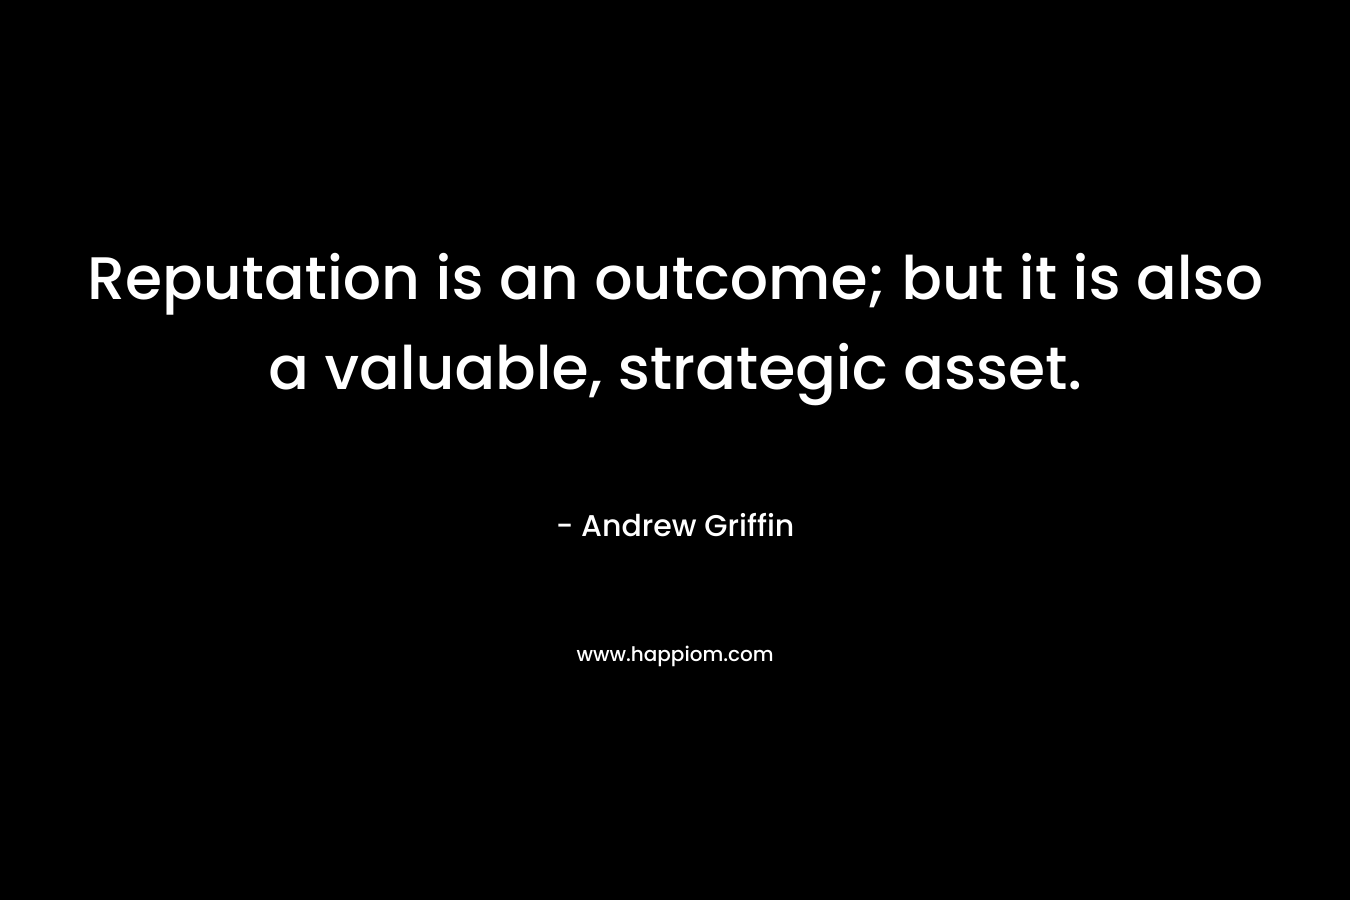 Reputation is an outcome; but it is also a valuable, strategic asset.